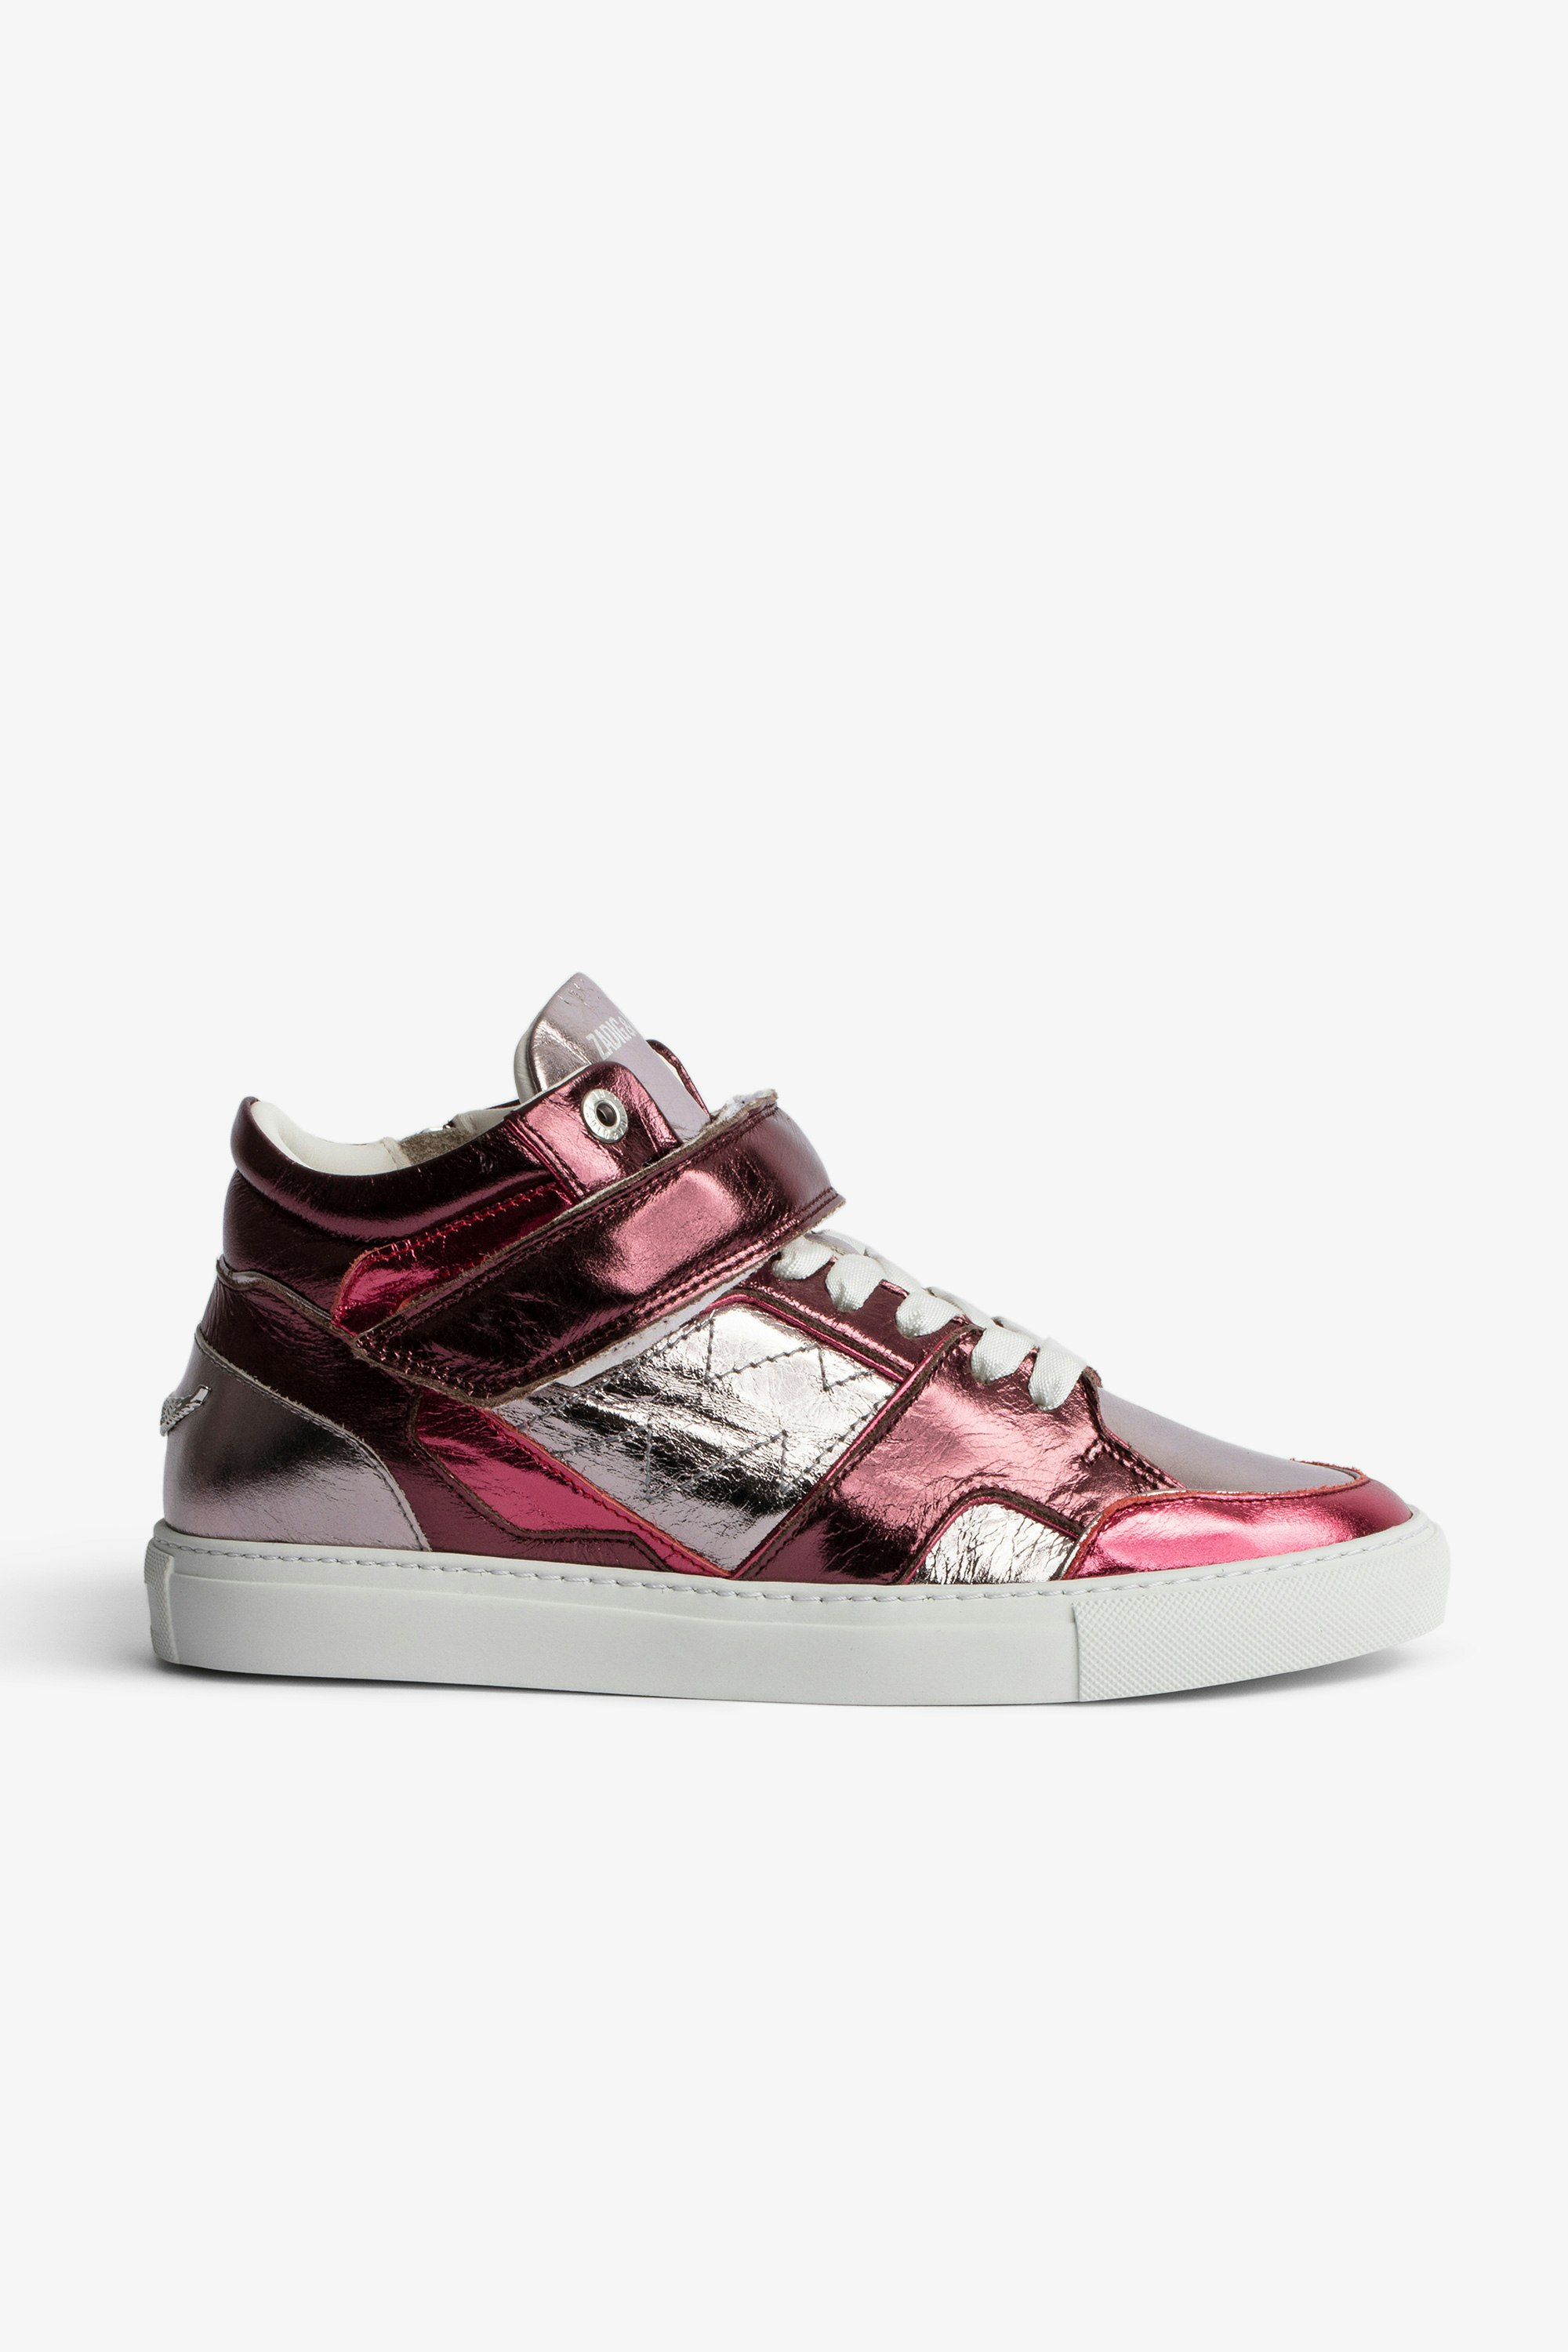 ZV1747 Mid Flash Vintage metal mix Sneakers Women’s mid-top sneakers in silver and red metallic leather